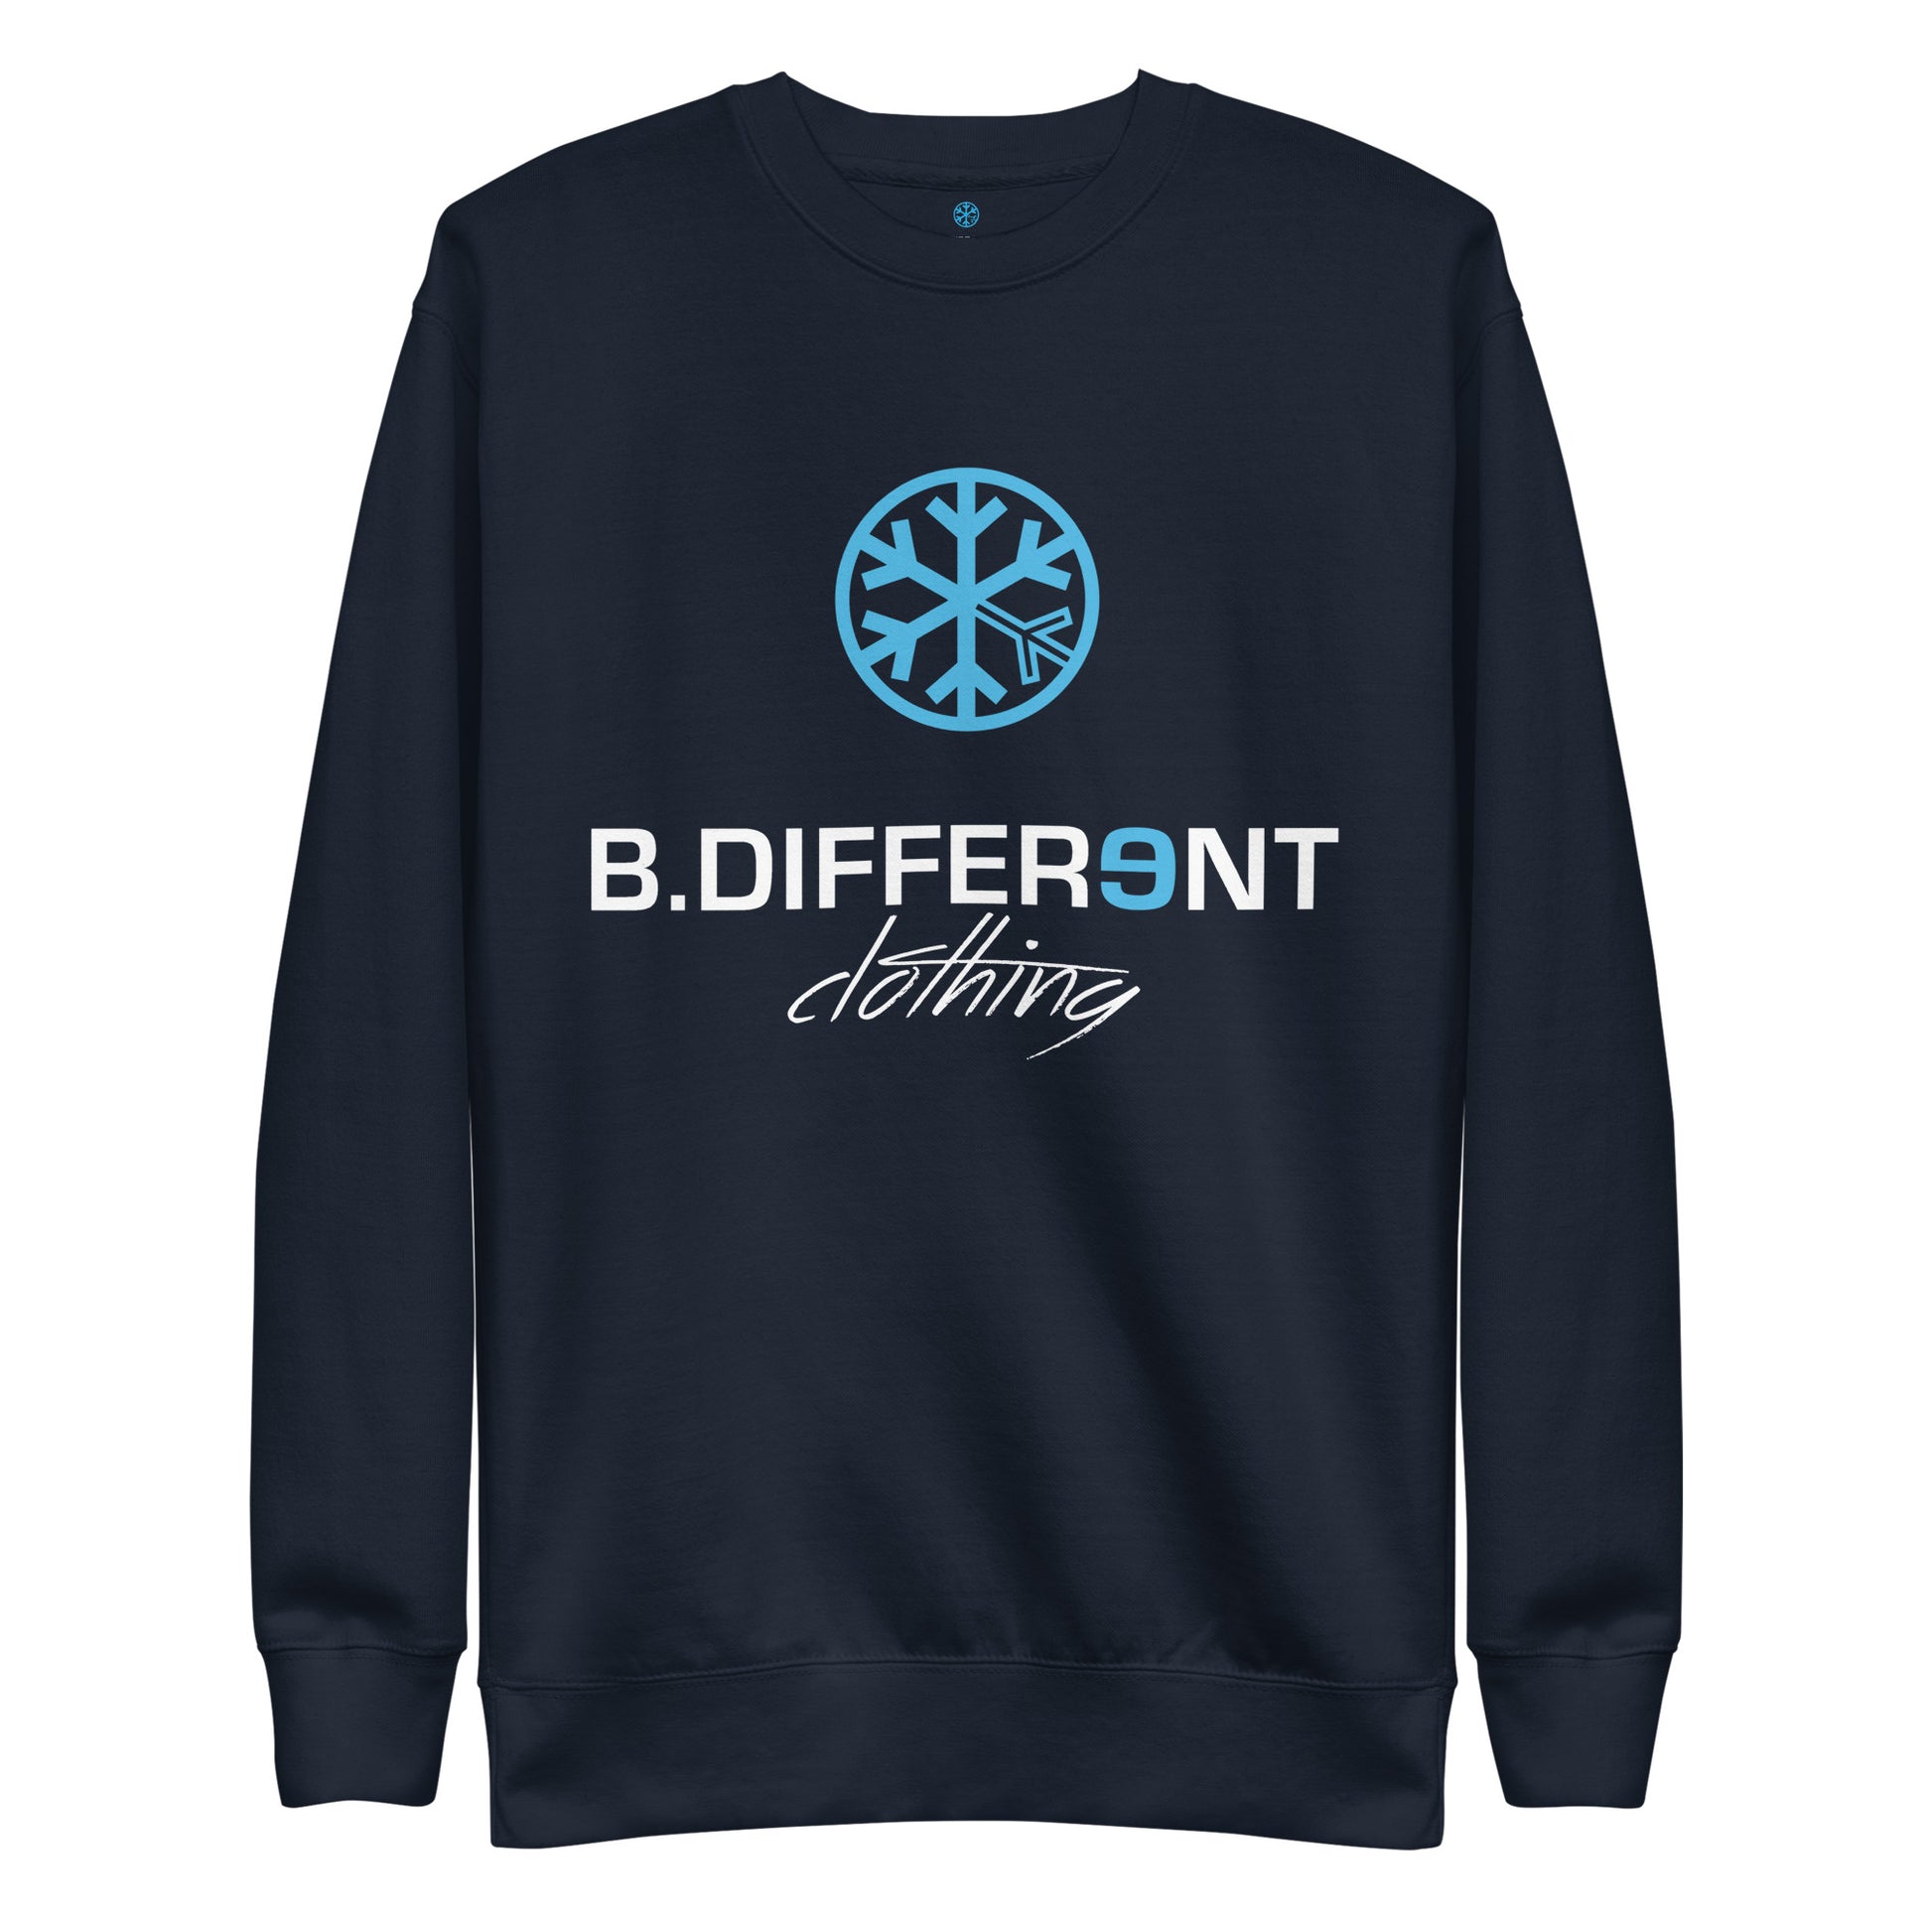 sweatshirt Logo navy by B.Different Clothing independent streetwear brand inspired by street art graffiti